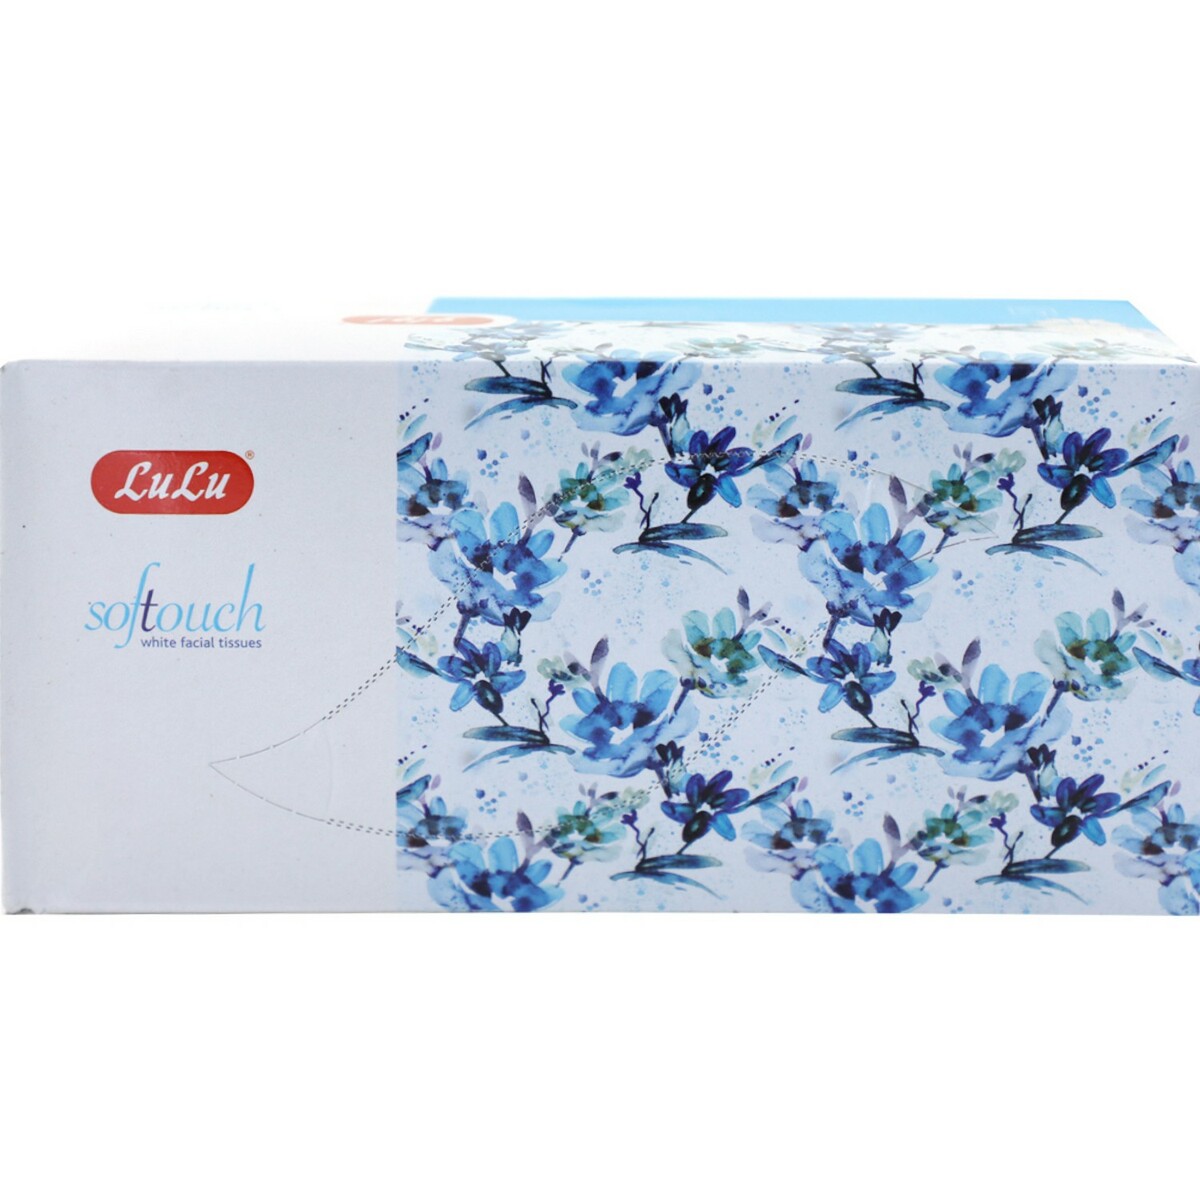 Lulu Soft Touch White Facial Tissue Purple 200 x 2ply 1pc